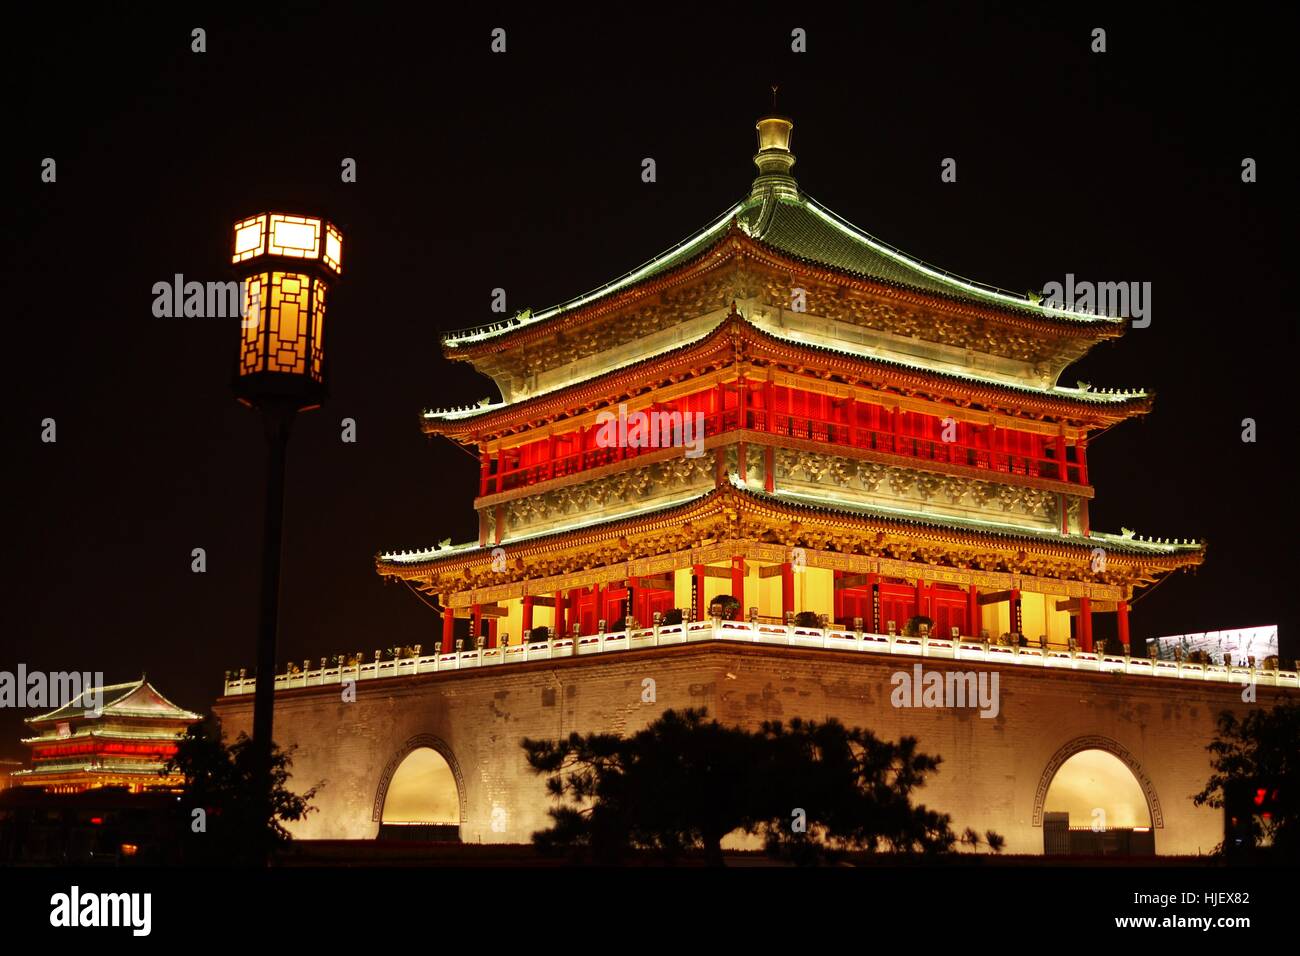 Bell tower of Xi'an, Tang dynasty architecture style, China Stock Photo